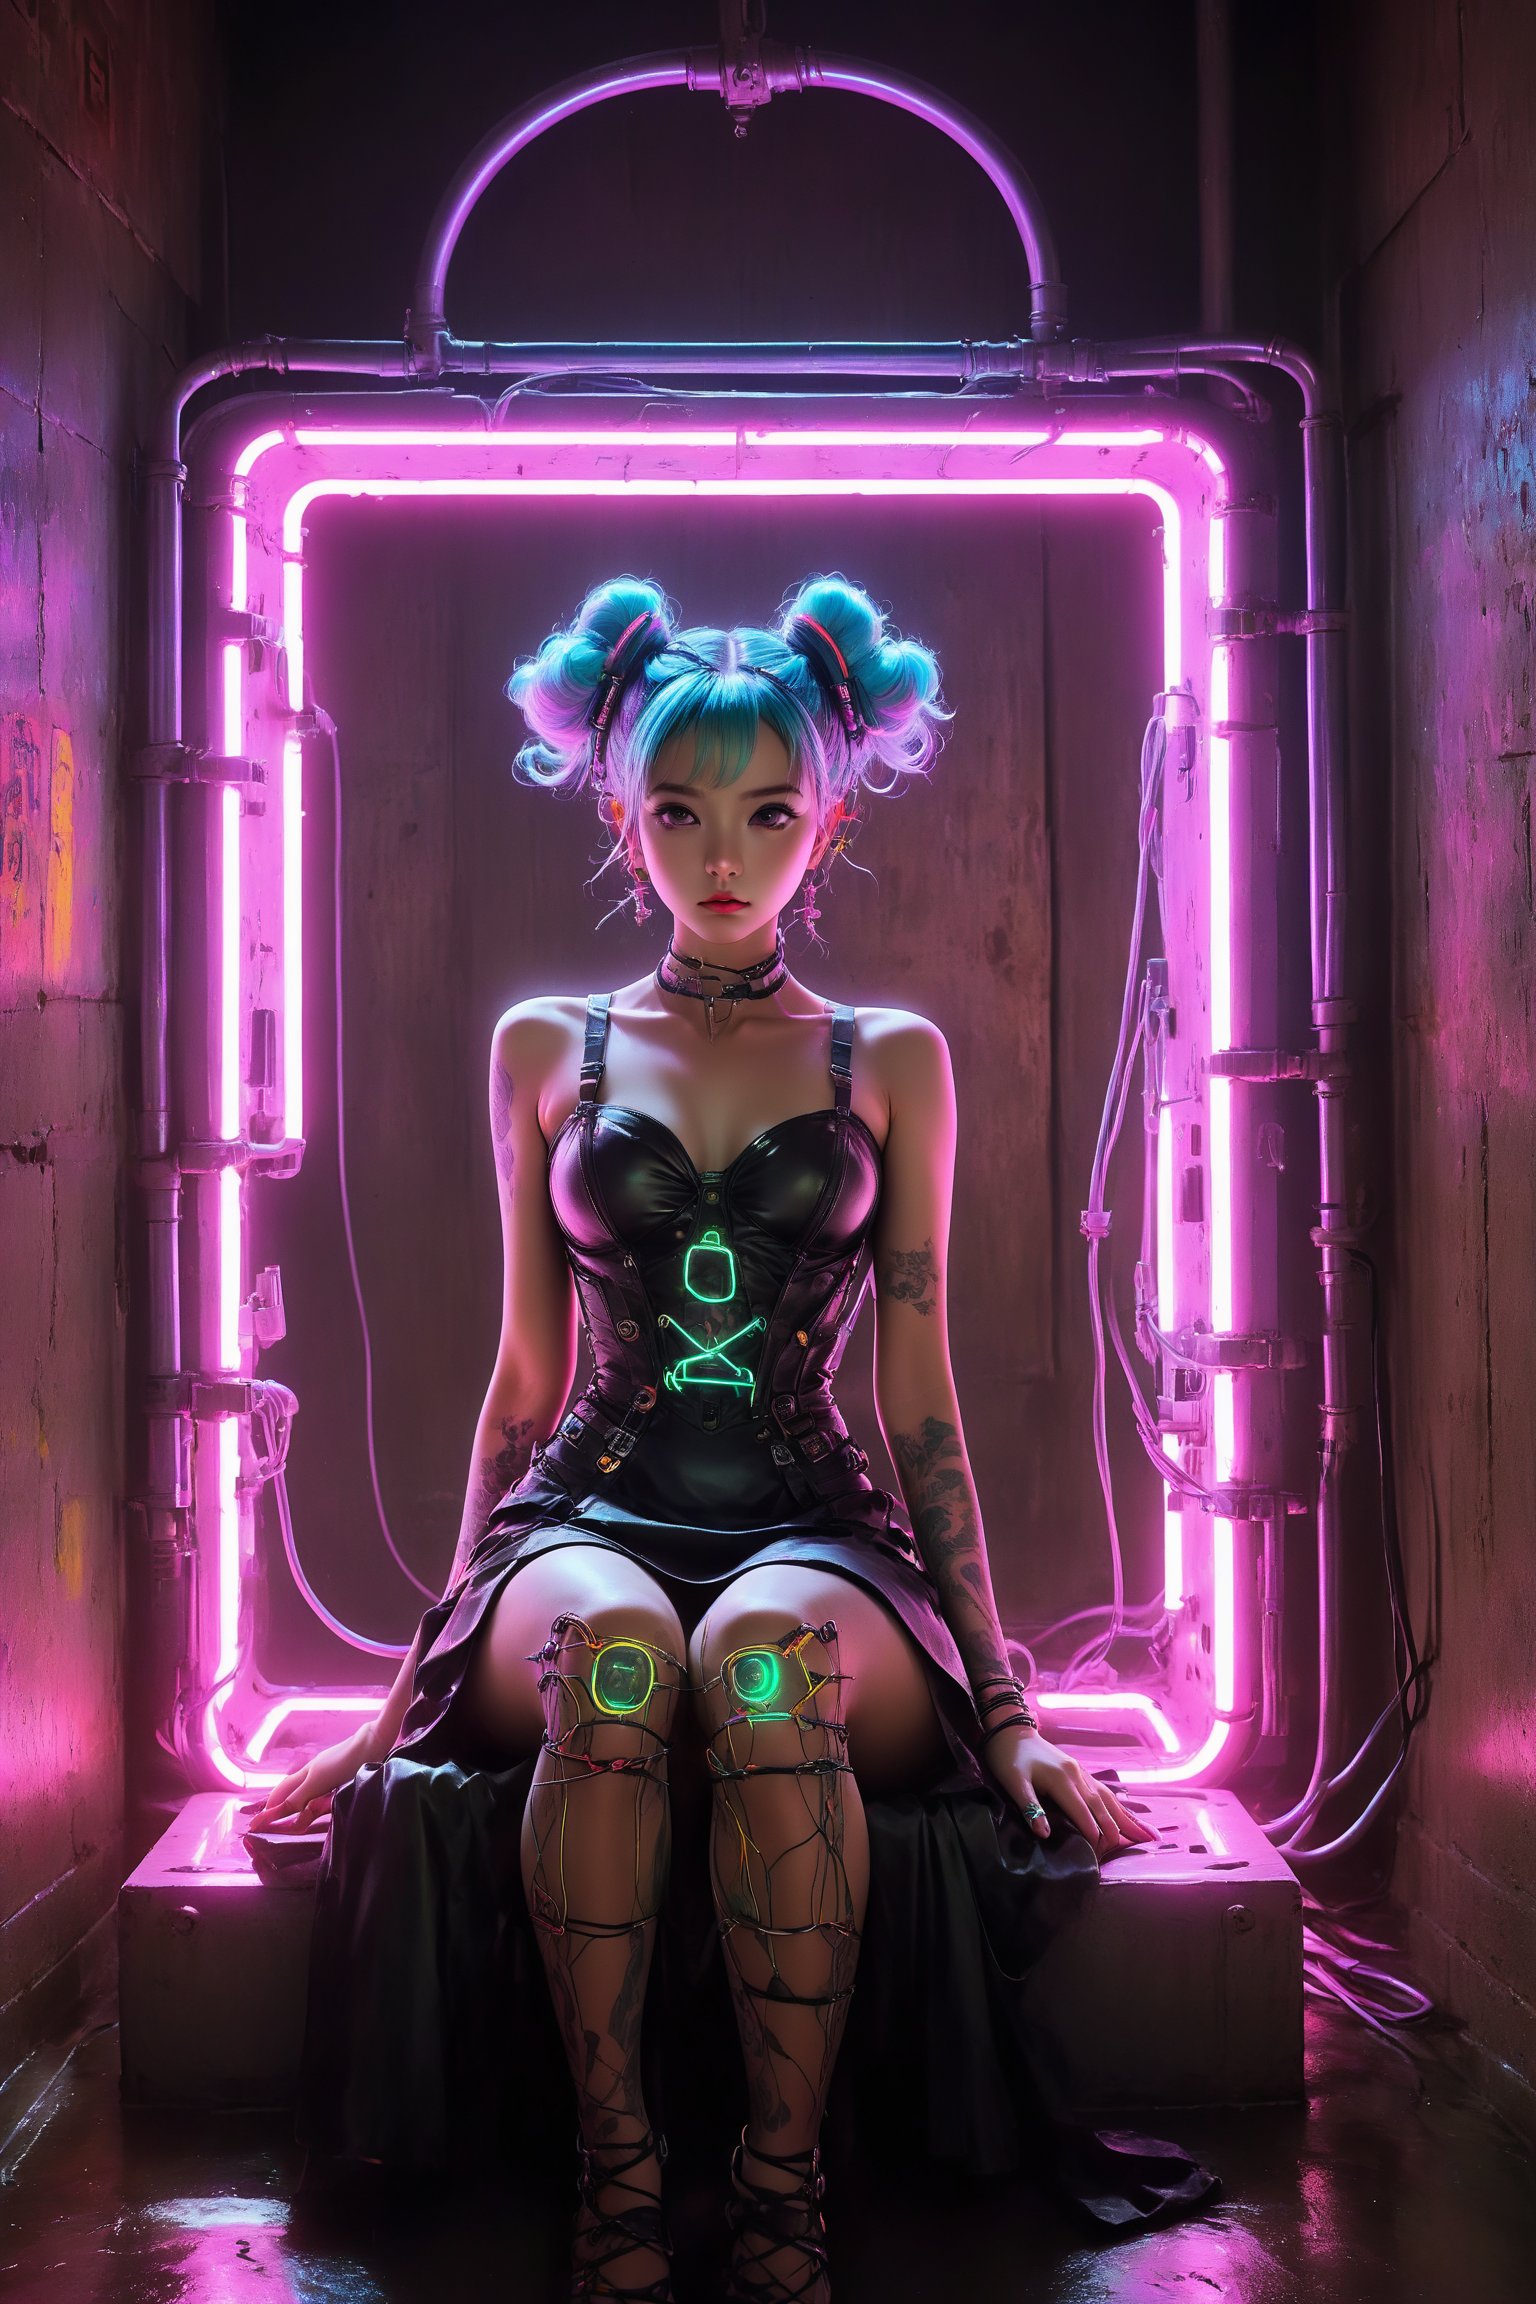 In this 8K masterpiece, a statuesque figure majestically sits within an abandoned prison cell, bathed in mesmerizing neon light that dances across her beauty. (A colourful doorway to another dimension bathes the scene in an errie light:1.4), Her twin buns hair is made up of wires and cables, framing her face. Adorned with intricate black lingerie and latex dress, she exudes regal elegance amidst the darkness. Brutalist machinery surrounds her throne-like seat, casting colorful lights on her tattoos, a testament to her cyborg nature as biopunk wires course through her body like veins. Wires and cables attach her head to the walls, creating an unsettling atmosphere of tension as if she's a slave to the machine. Sooyaaa